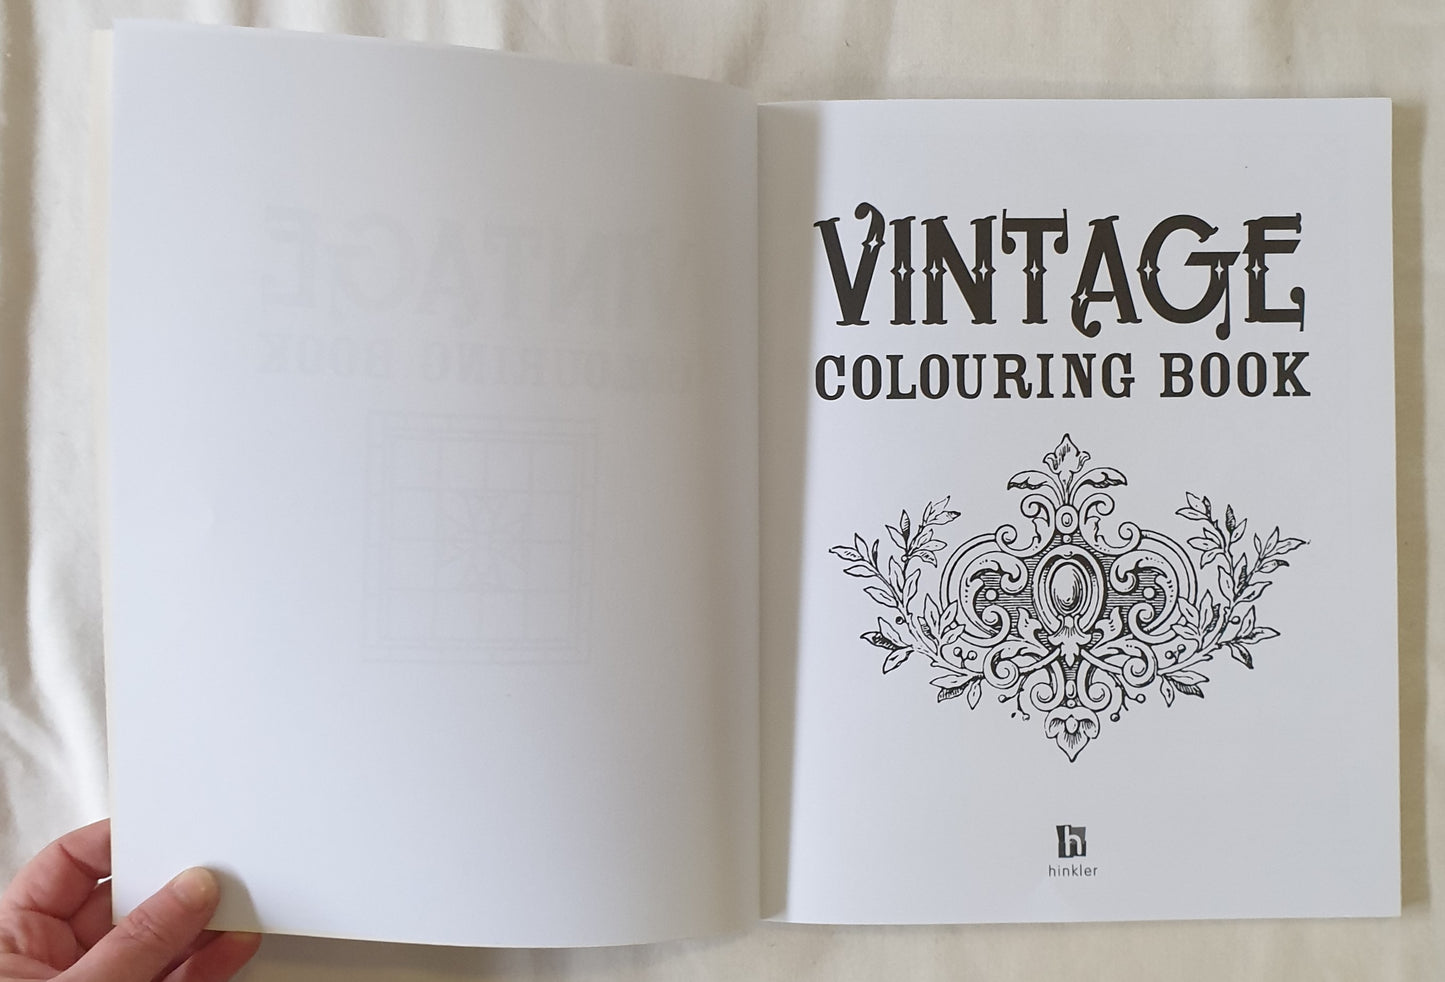 Vintage Colouring Book